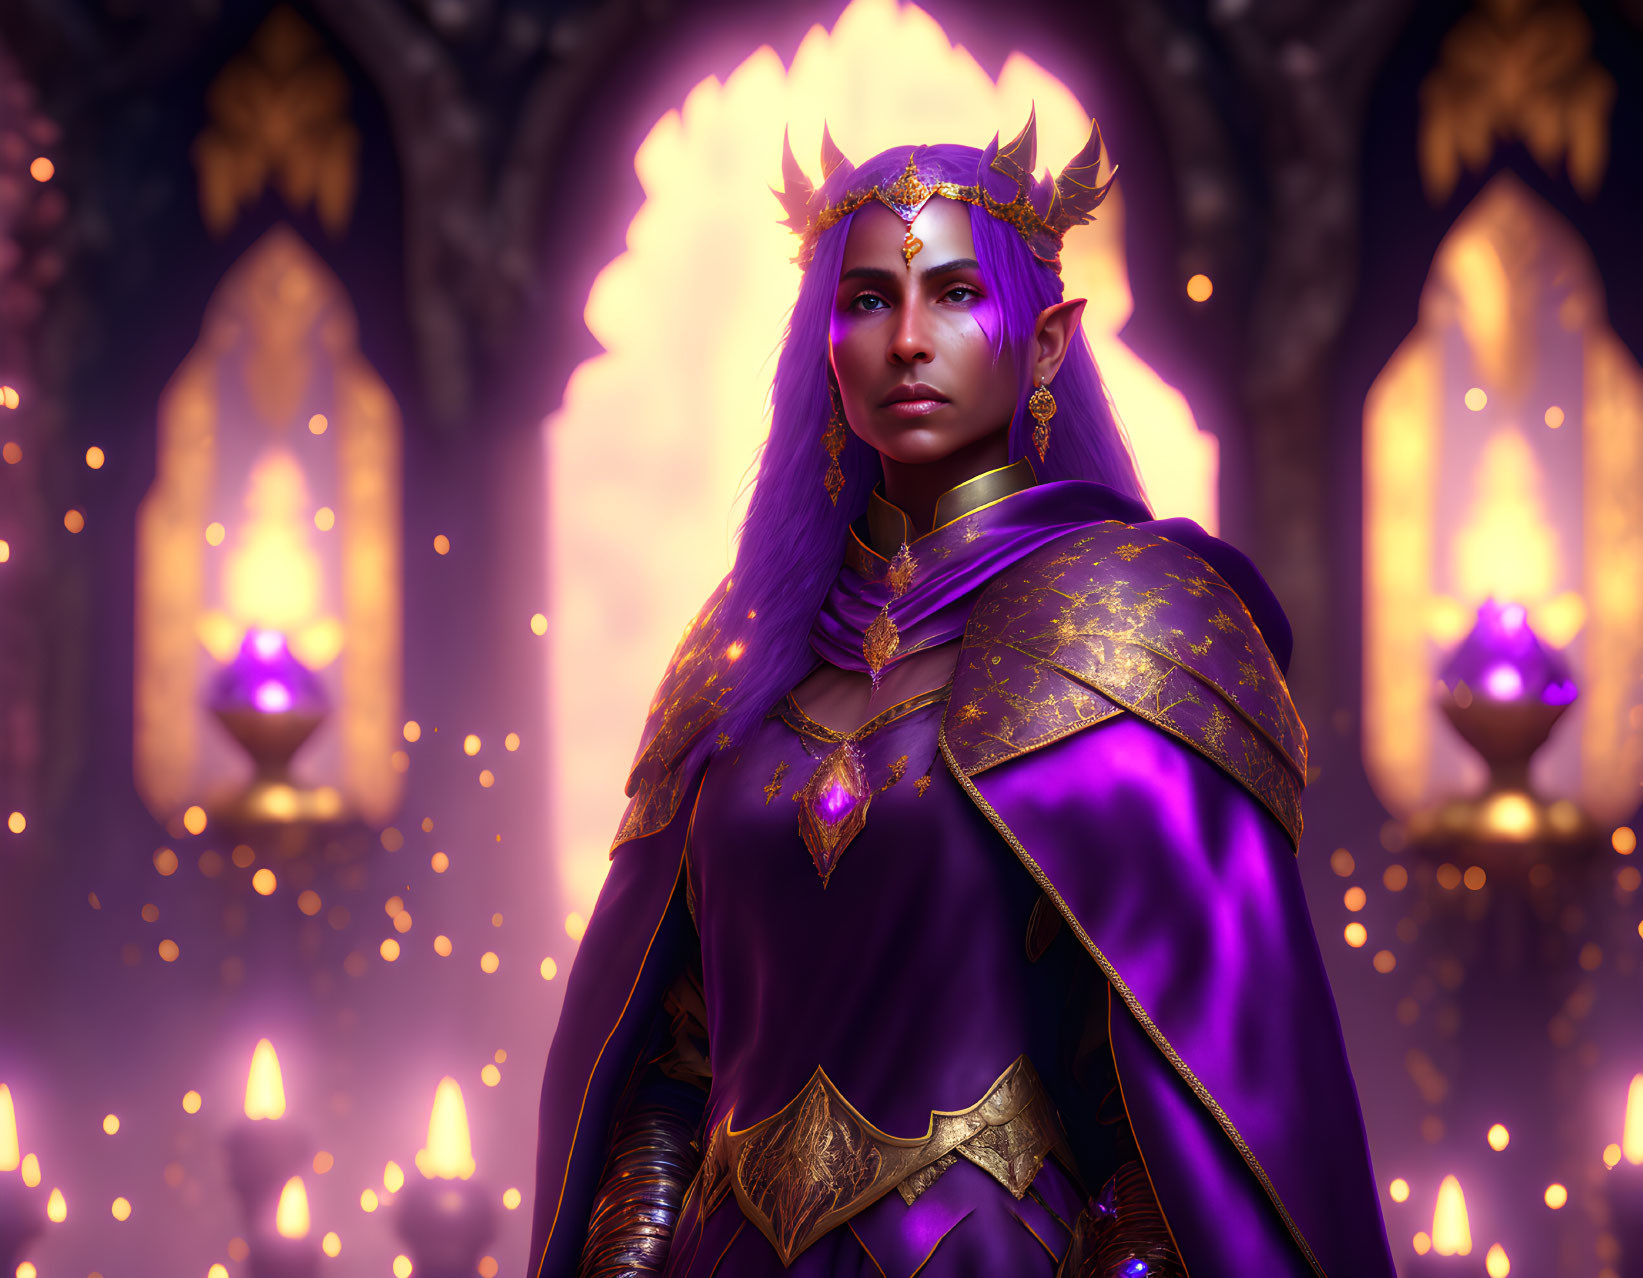 Fantasy character in golden armor and crown in candlelit setting